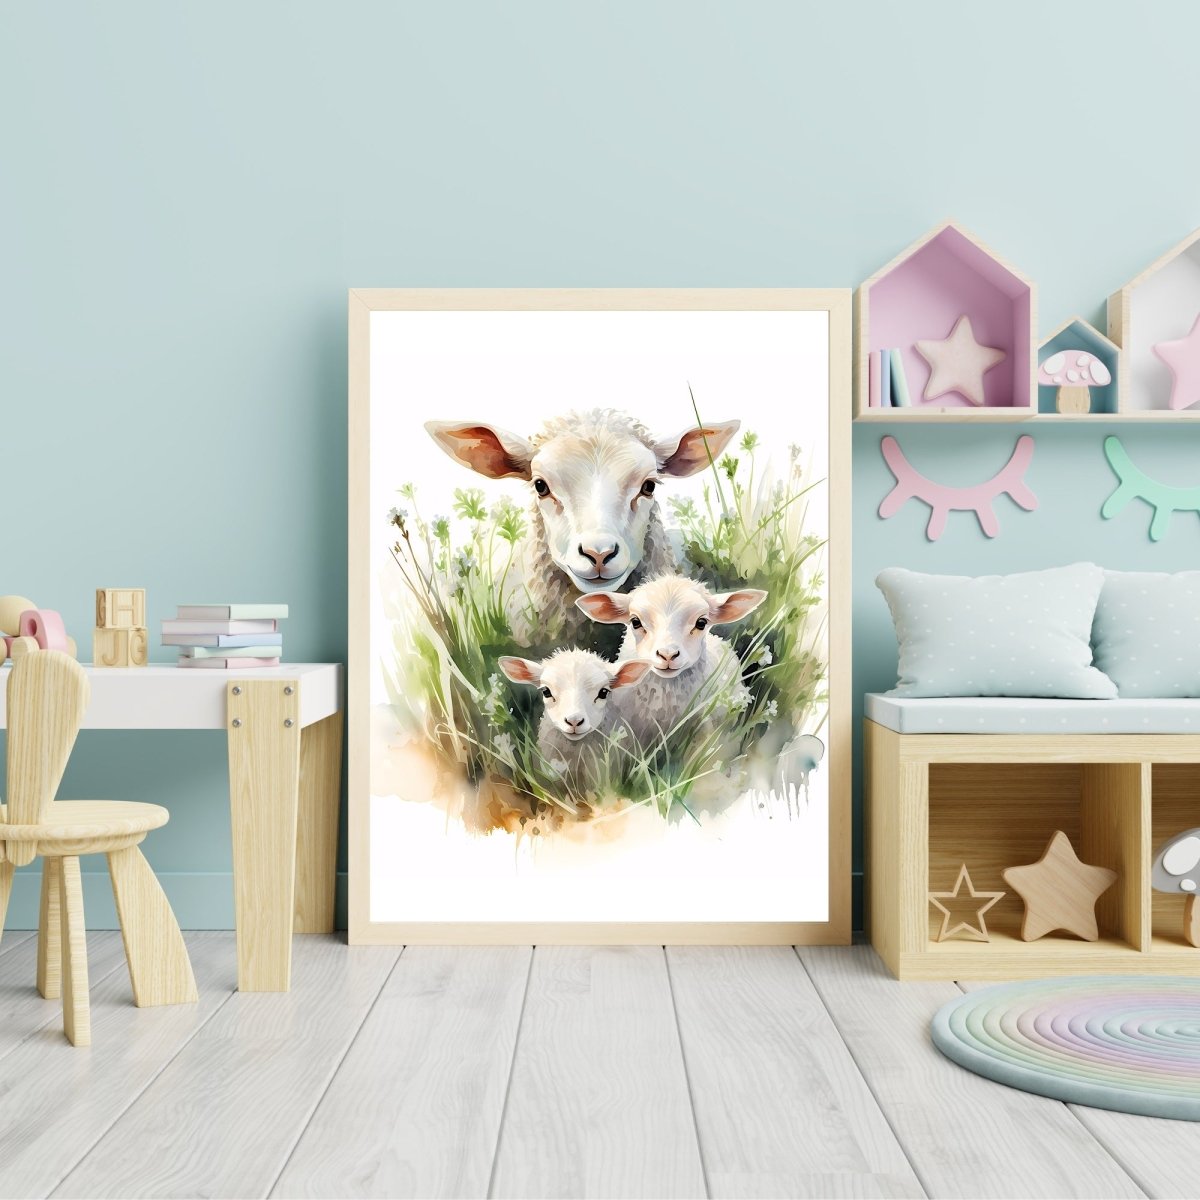 Sheep Family in High Grass - Watercolor Nursery Wall Art Print - Everything Pixel